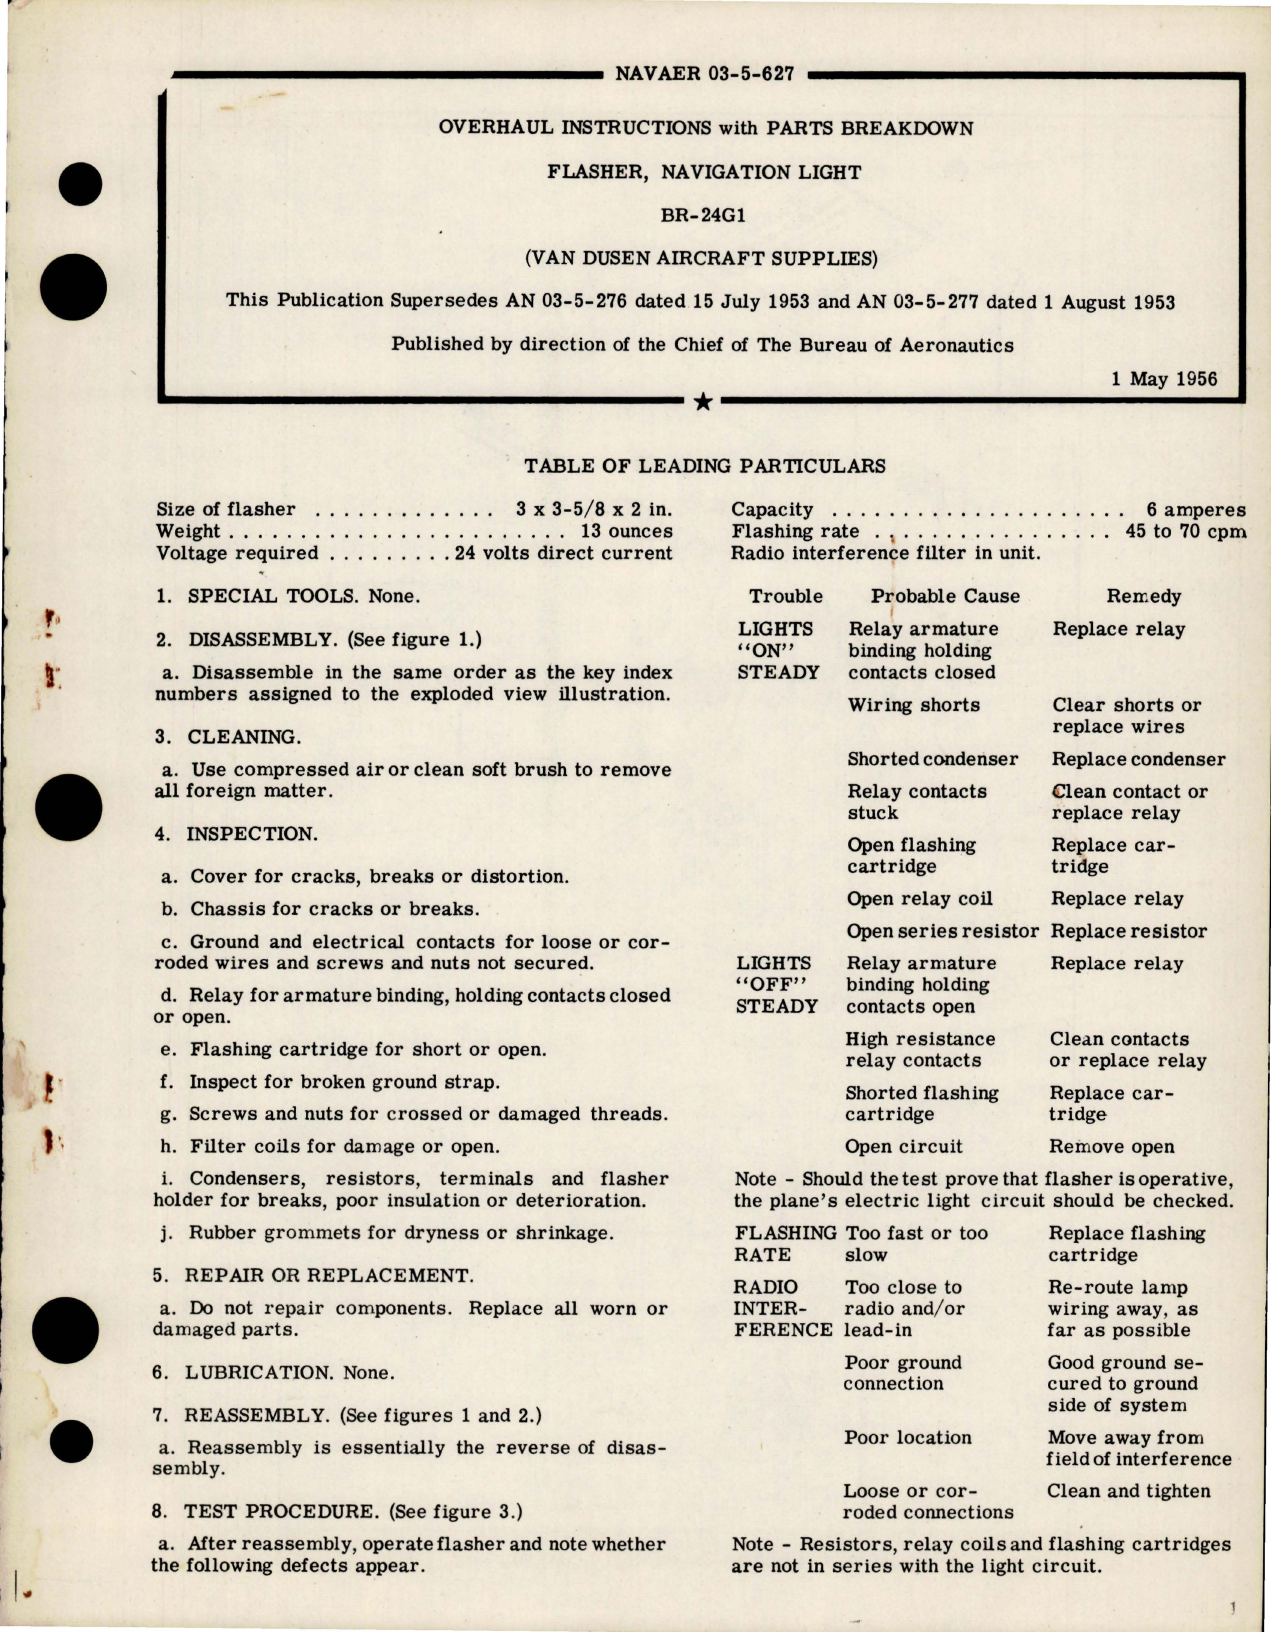 Sample page 1 from AirCorps Library document: Overhaul Instructions with Parts Breakdown for Navigation Light - Flasher - BR-24G1 